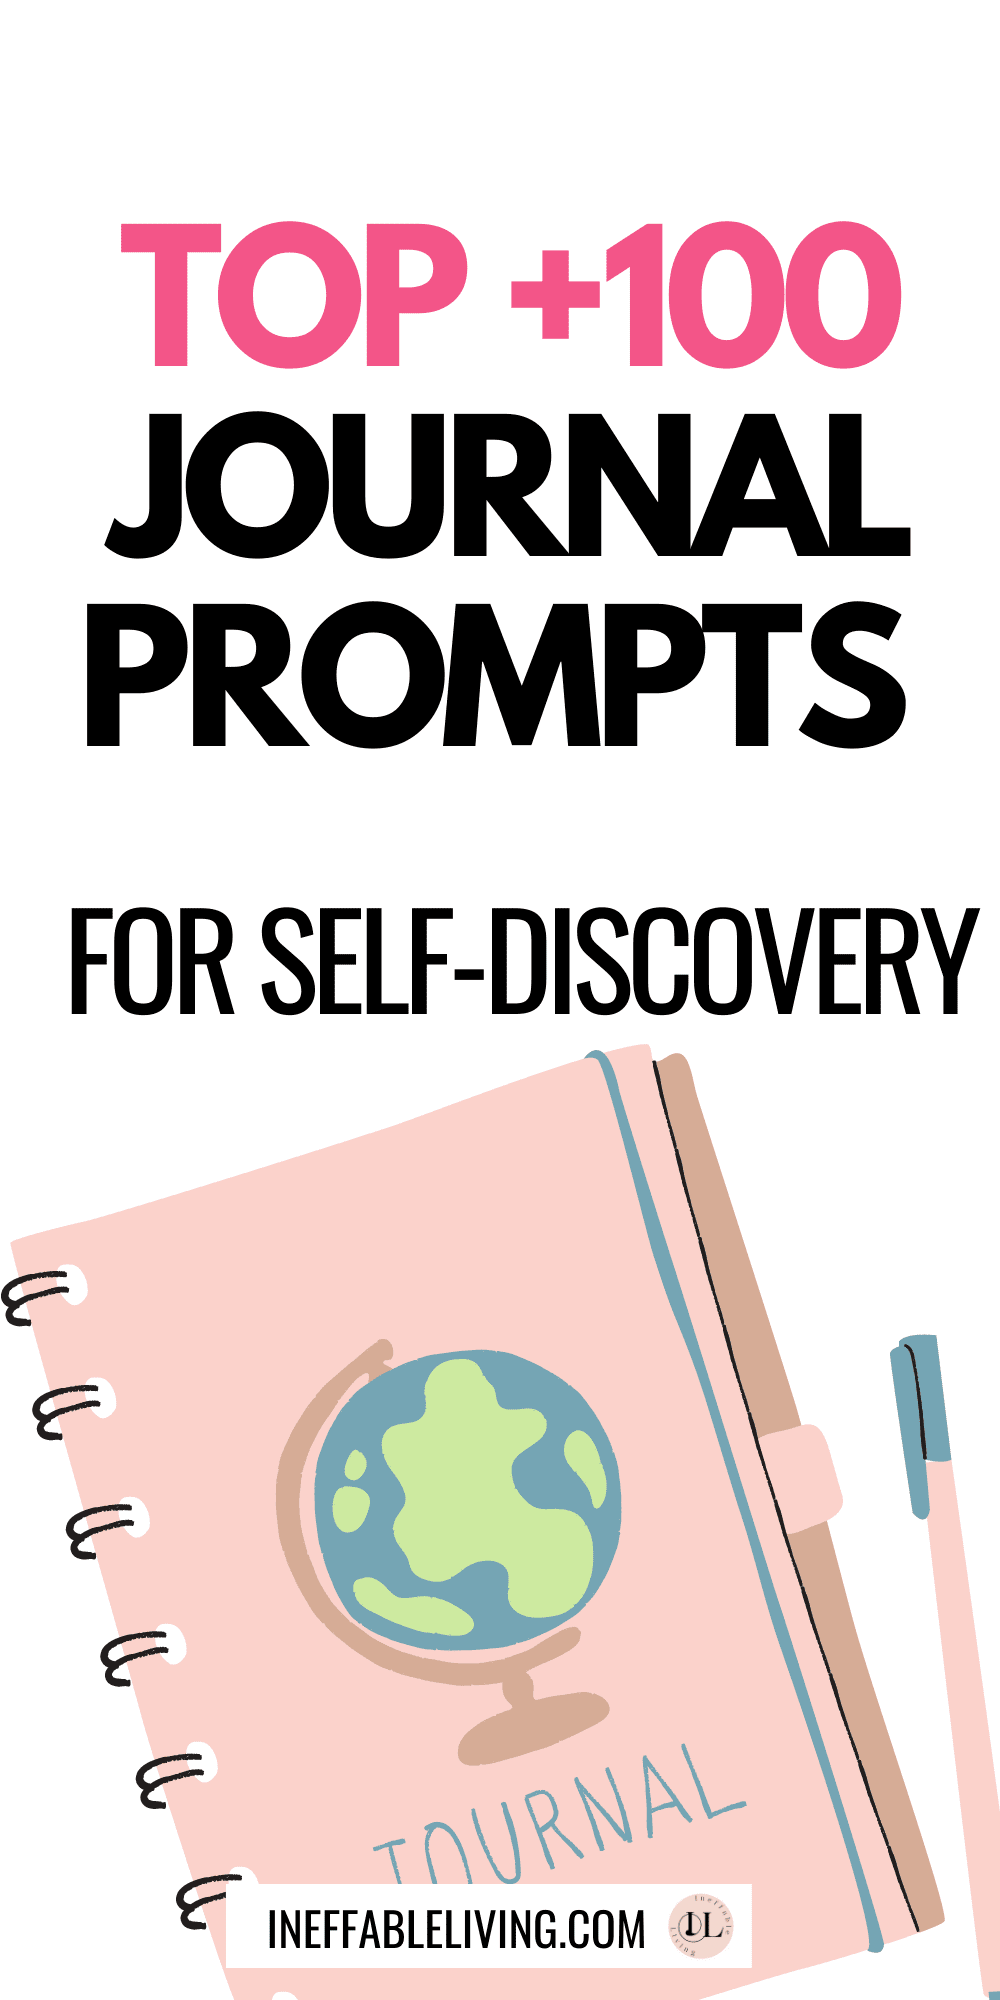 Top +100 Journal Prompts For Mental Health [+Free PDF Printable!]